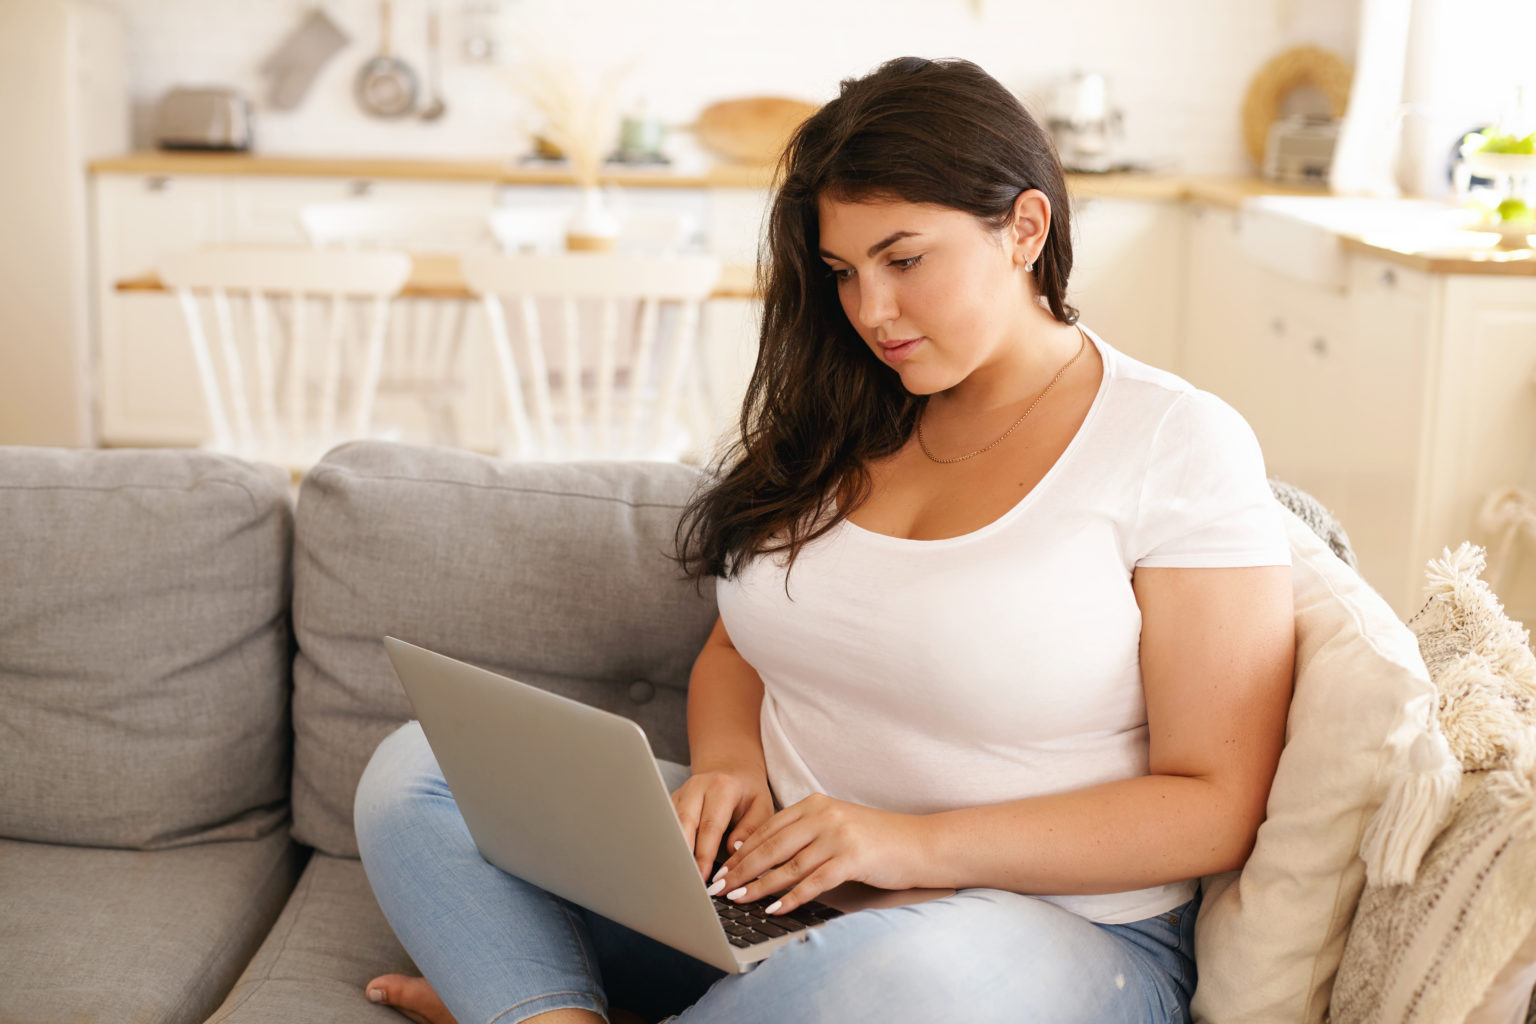 Adorable plus size student girl with loose black hair keyboarding on laptop sitting comfortably on sofa in living room, smiling, messaging friends online, using wireless high speed internet connection